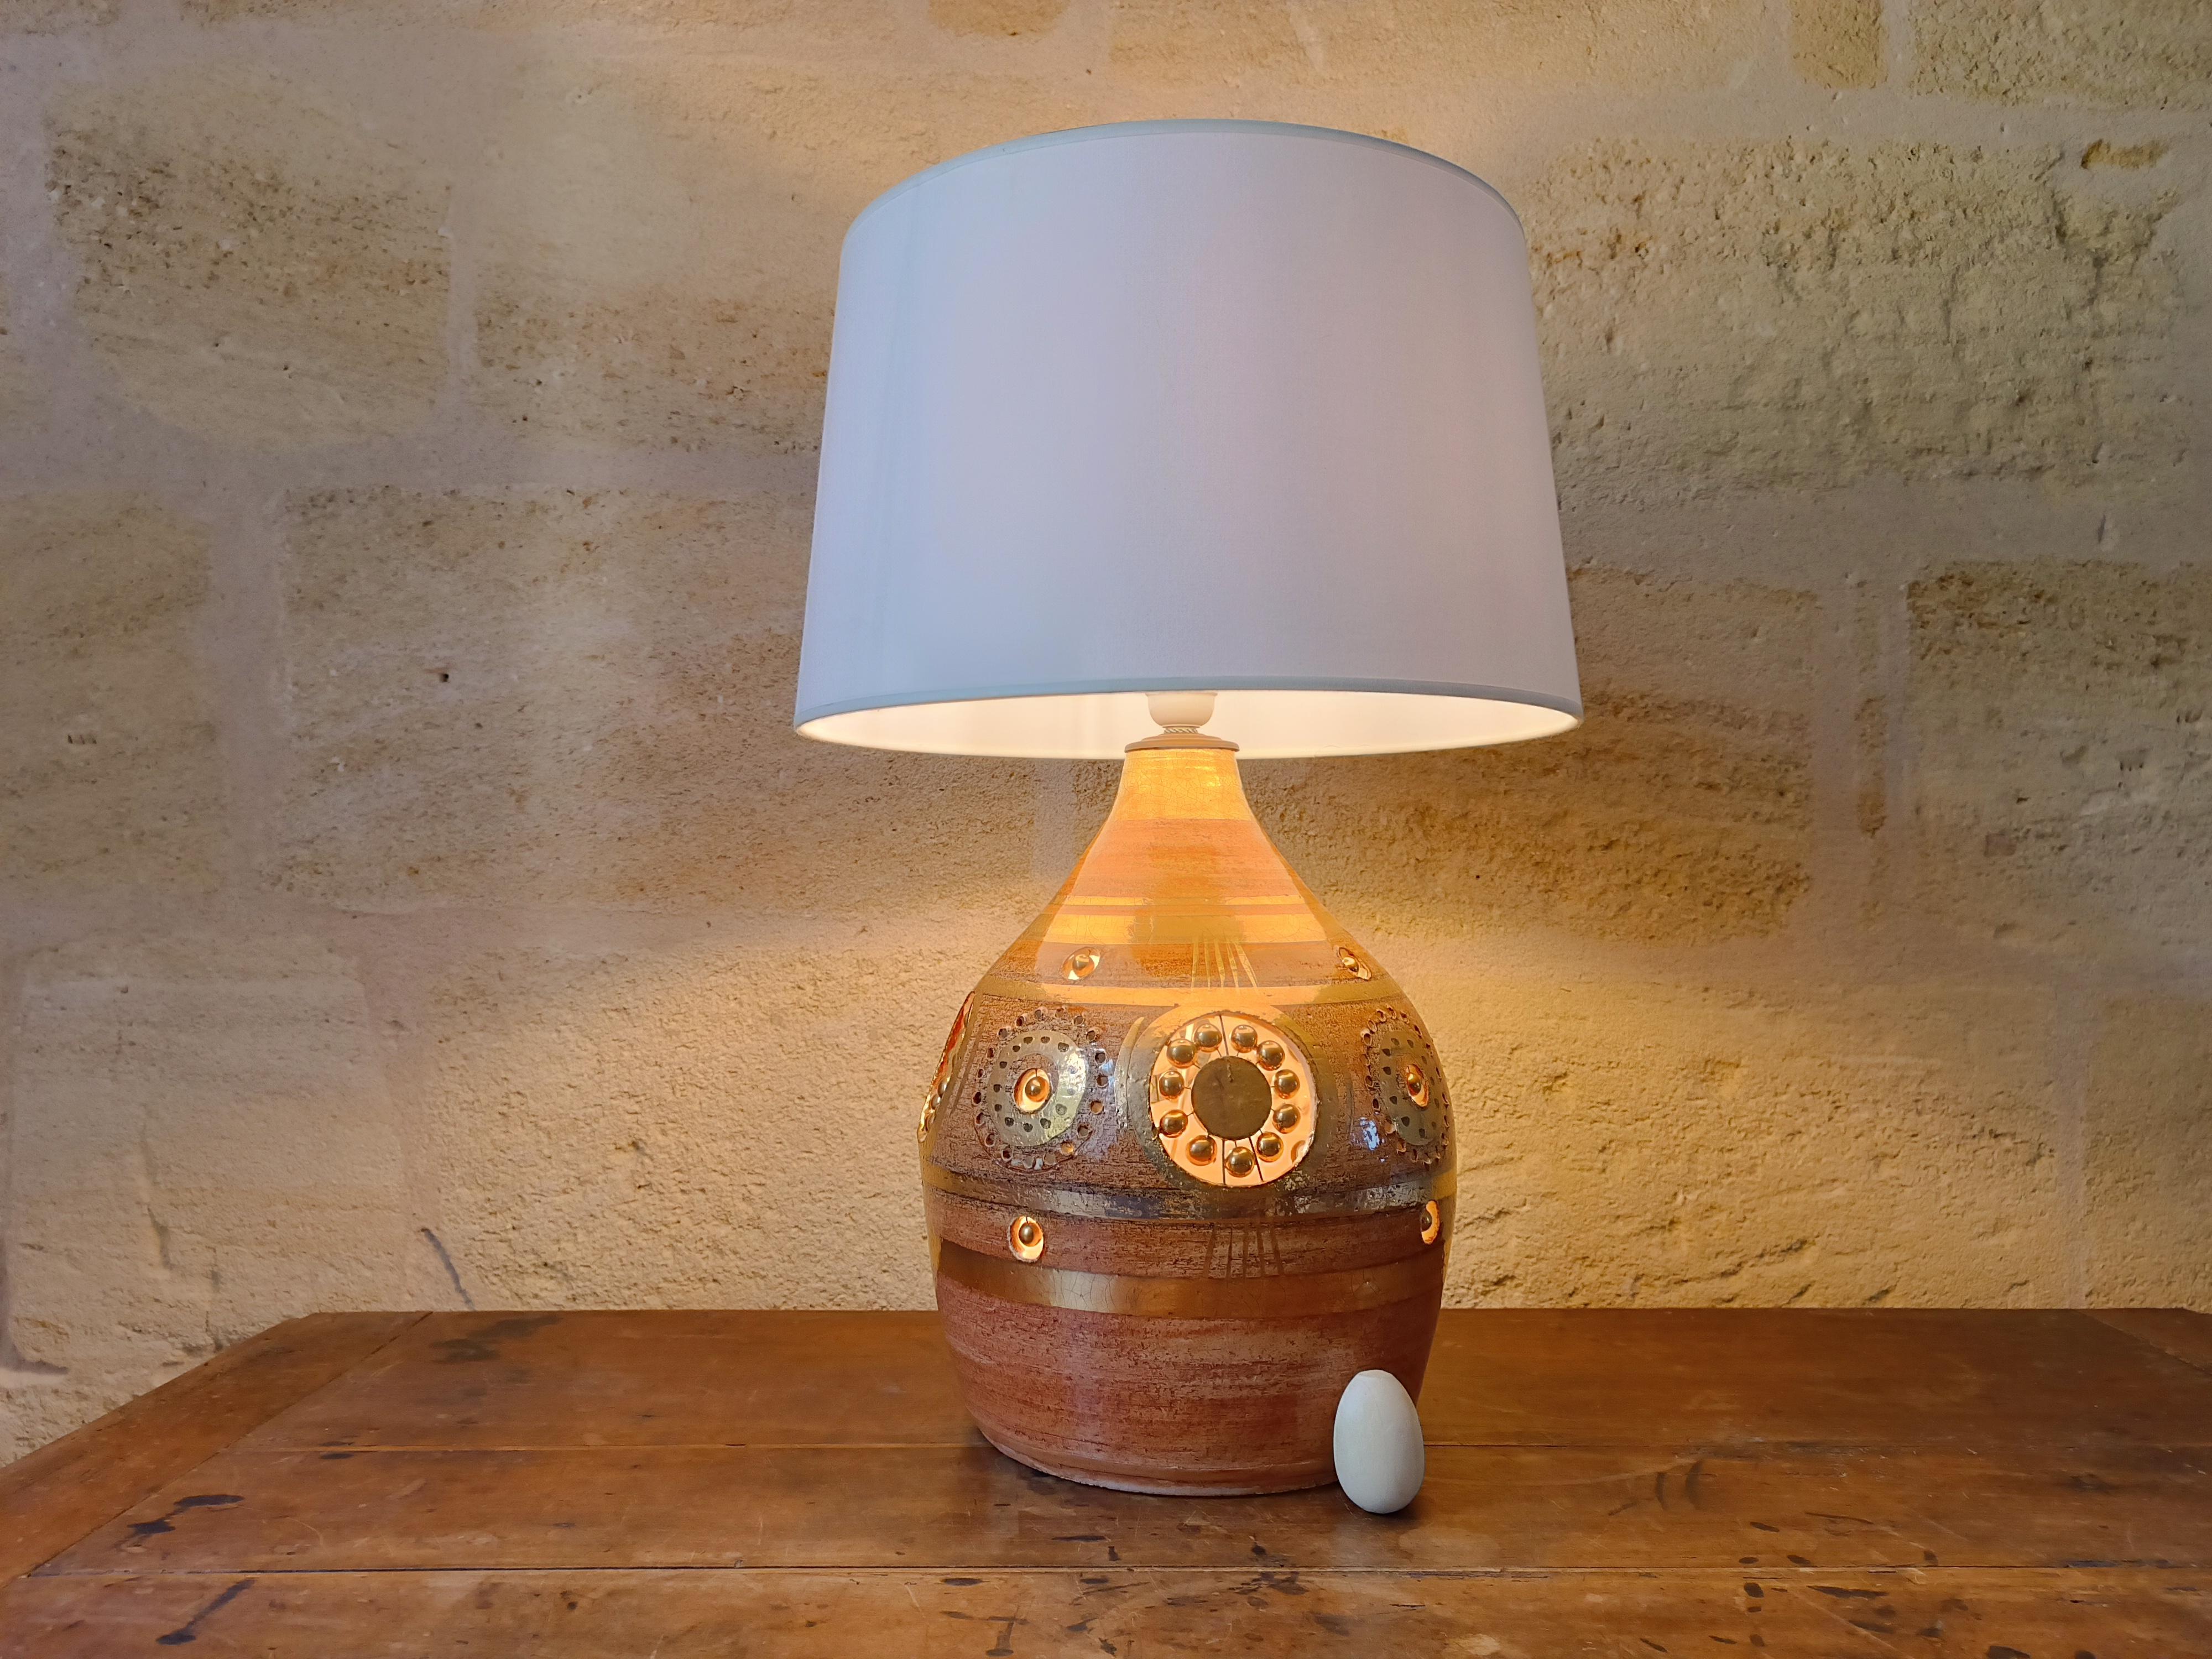 French Ceramic Table Lamp by Georges Pelletier, 1970s

It is a beautiful ceramic lamp. It offers a double lighting since a second bulb is inside the lamp base. The light is very soft and allows to highlight the characteristic shapes of Georges